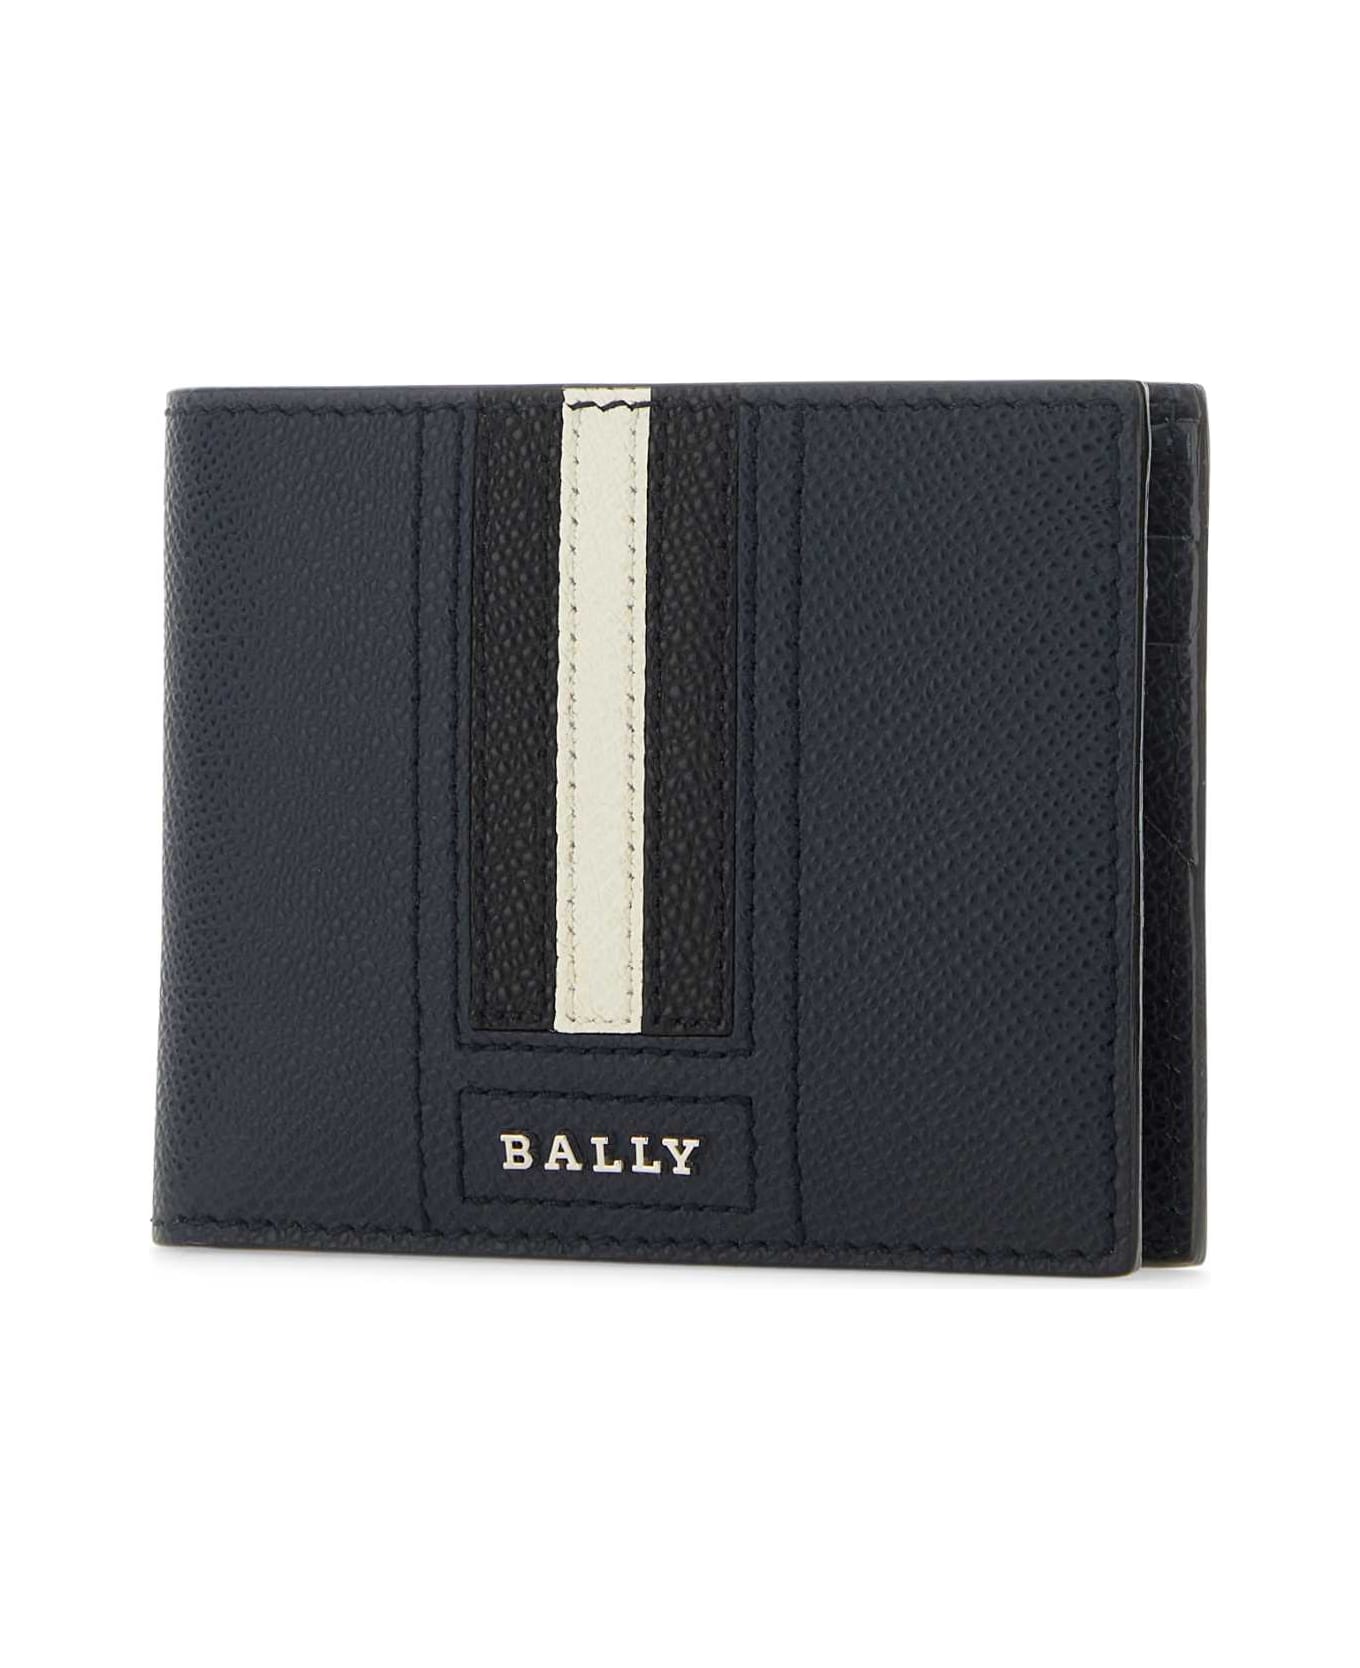 Bally Blue Leather Wallet - NEWBLUE